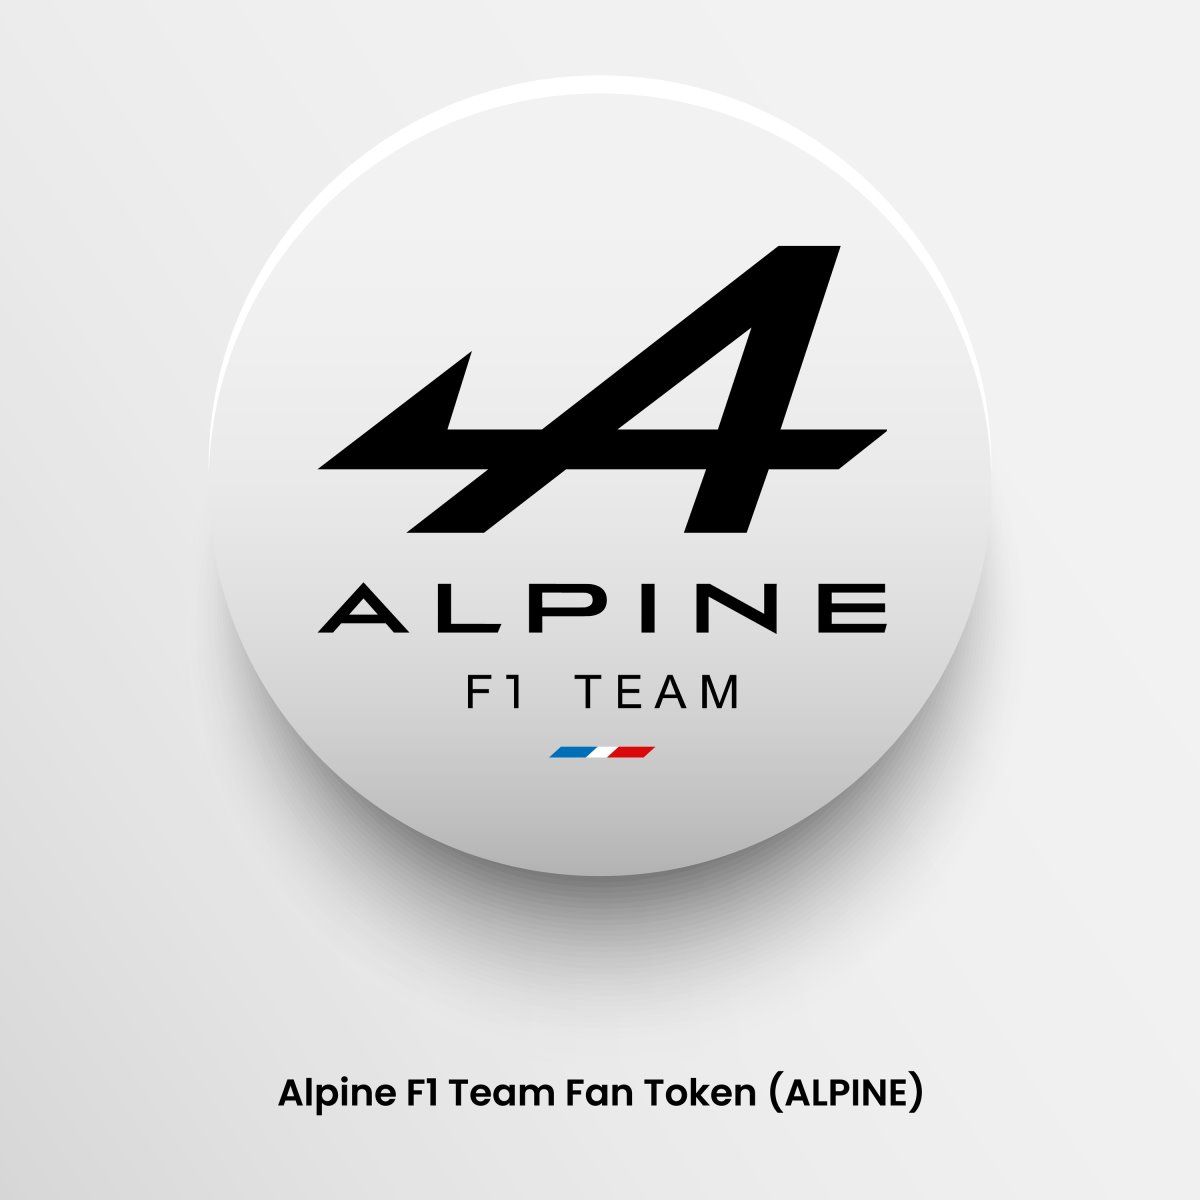 Alpine Is Finally Planning to Sell Cars in America